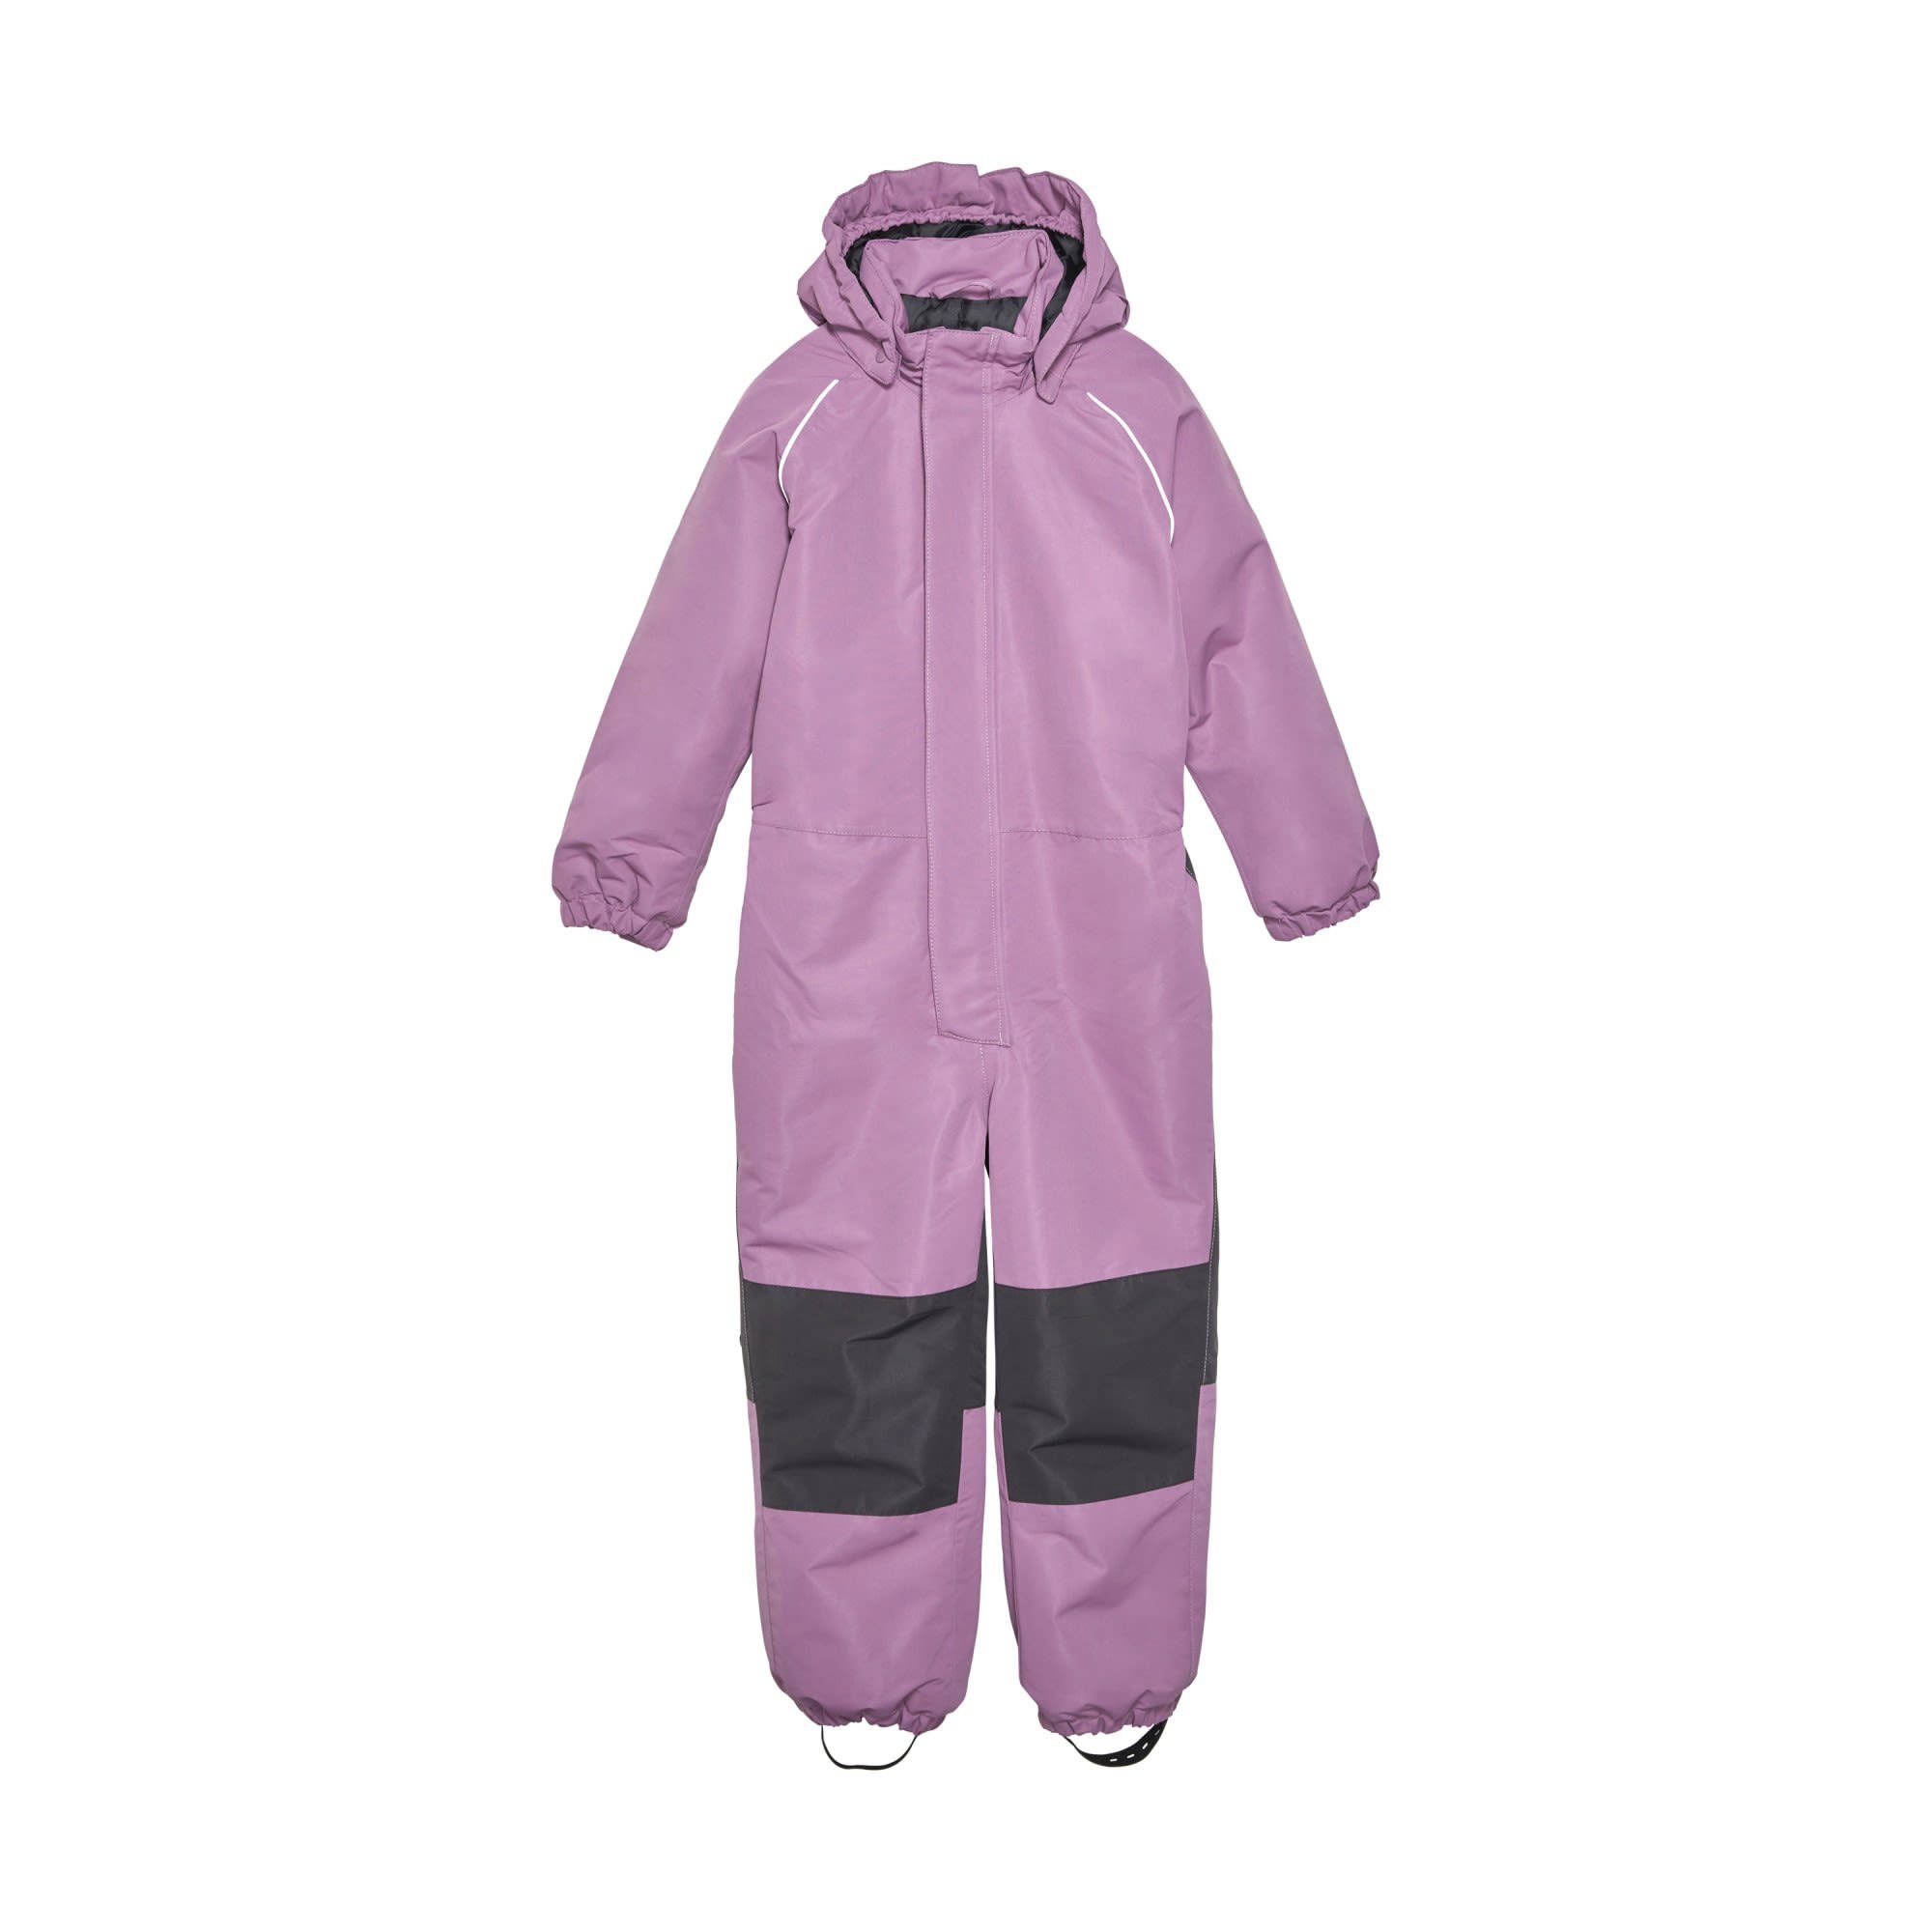 Kids Overall Argyle KIDS Purple Kinder COLOR Color Contrast With Kids Coverall